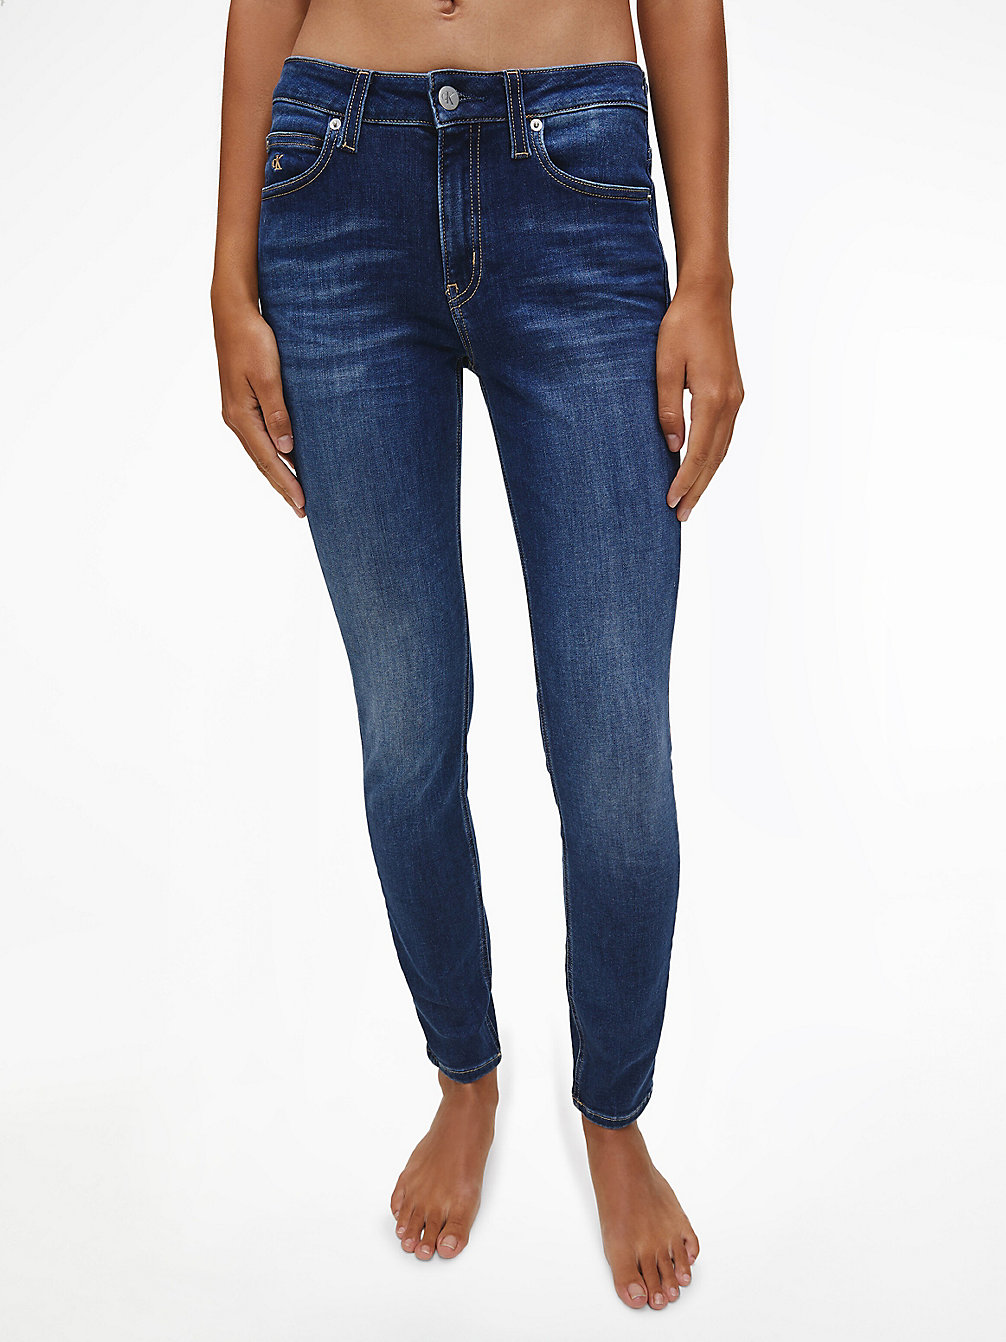 ZZ001 MID BLUE > Mid Rise Skinny Jeans > undefined dames - Calvin Klein